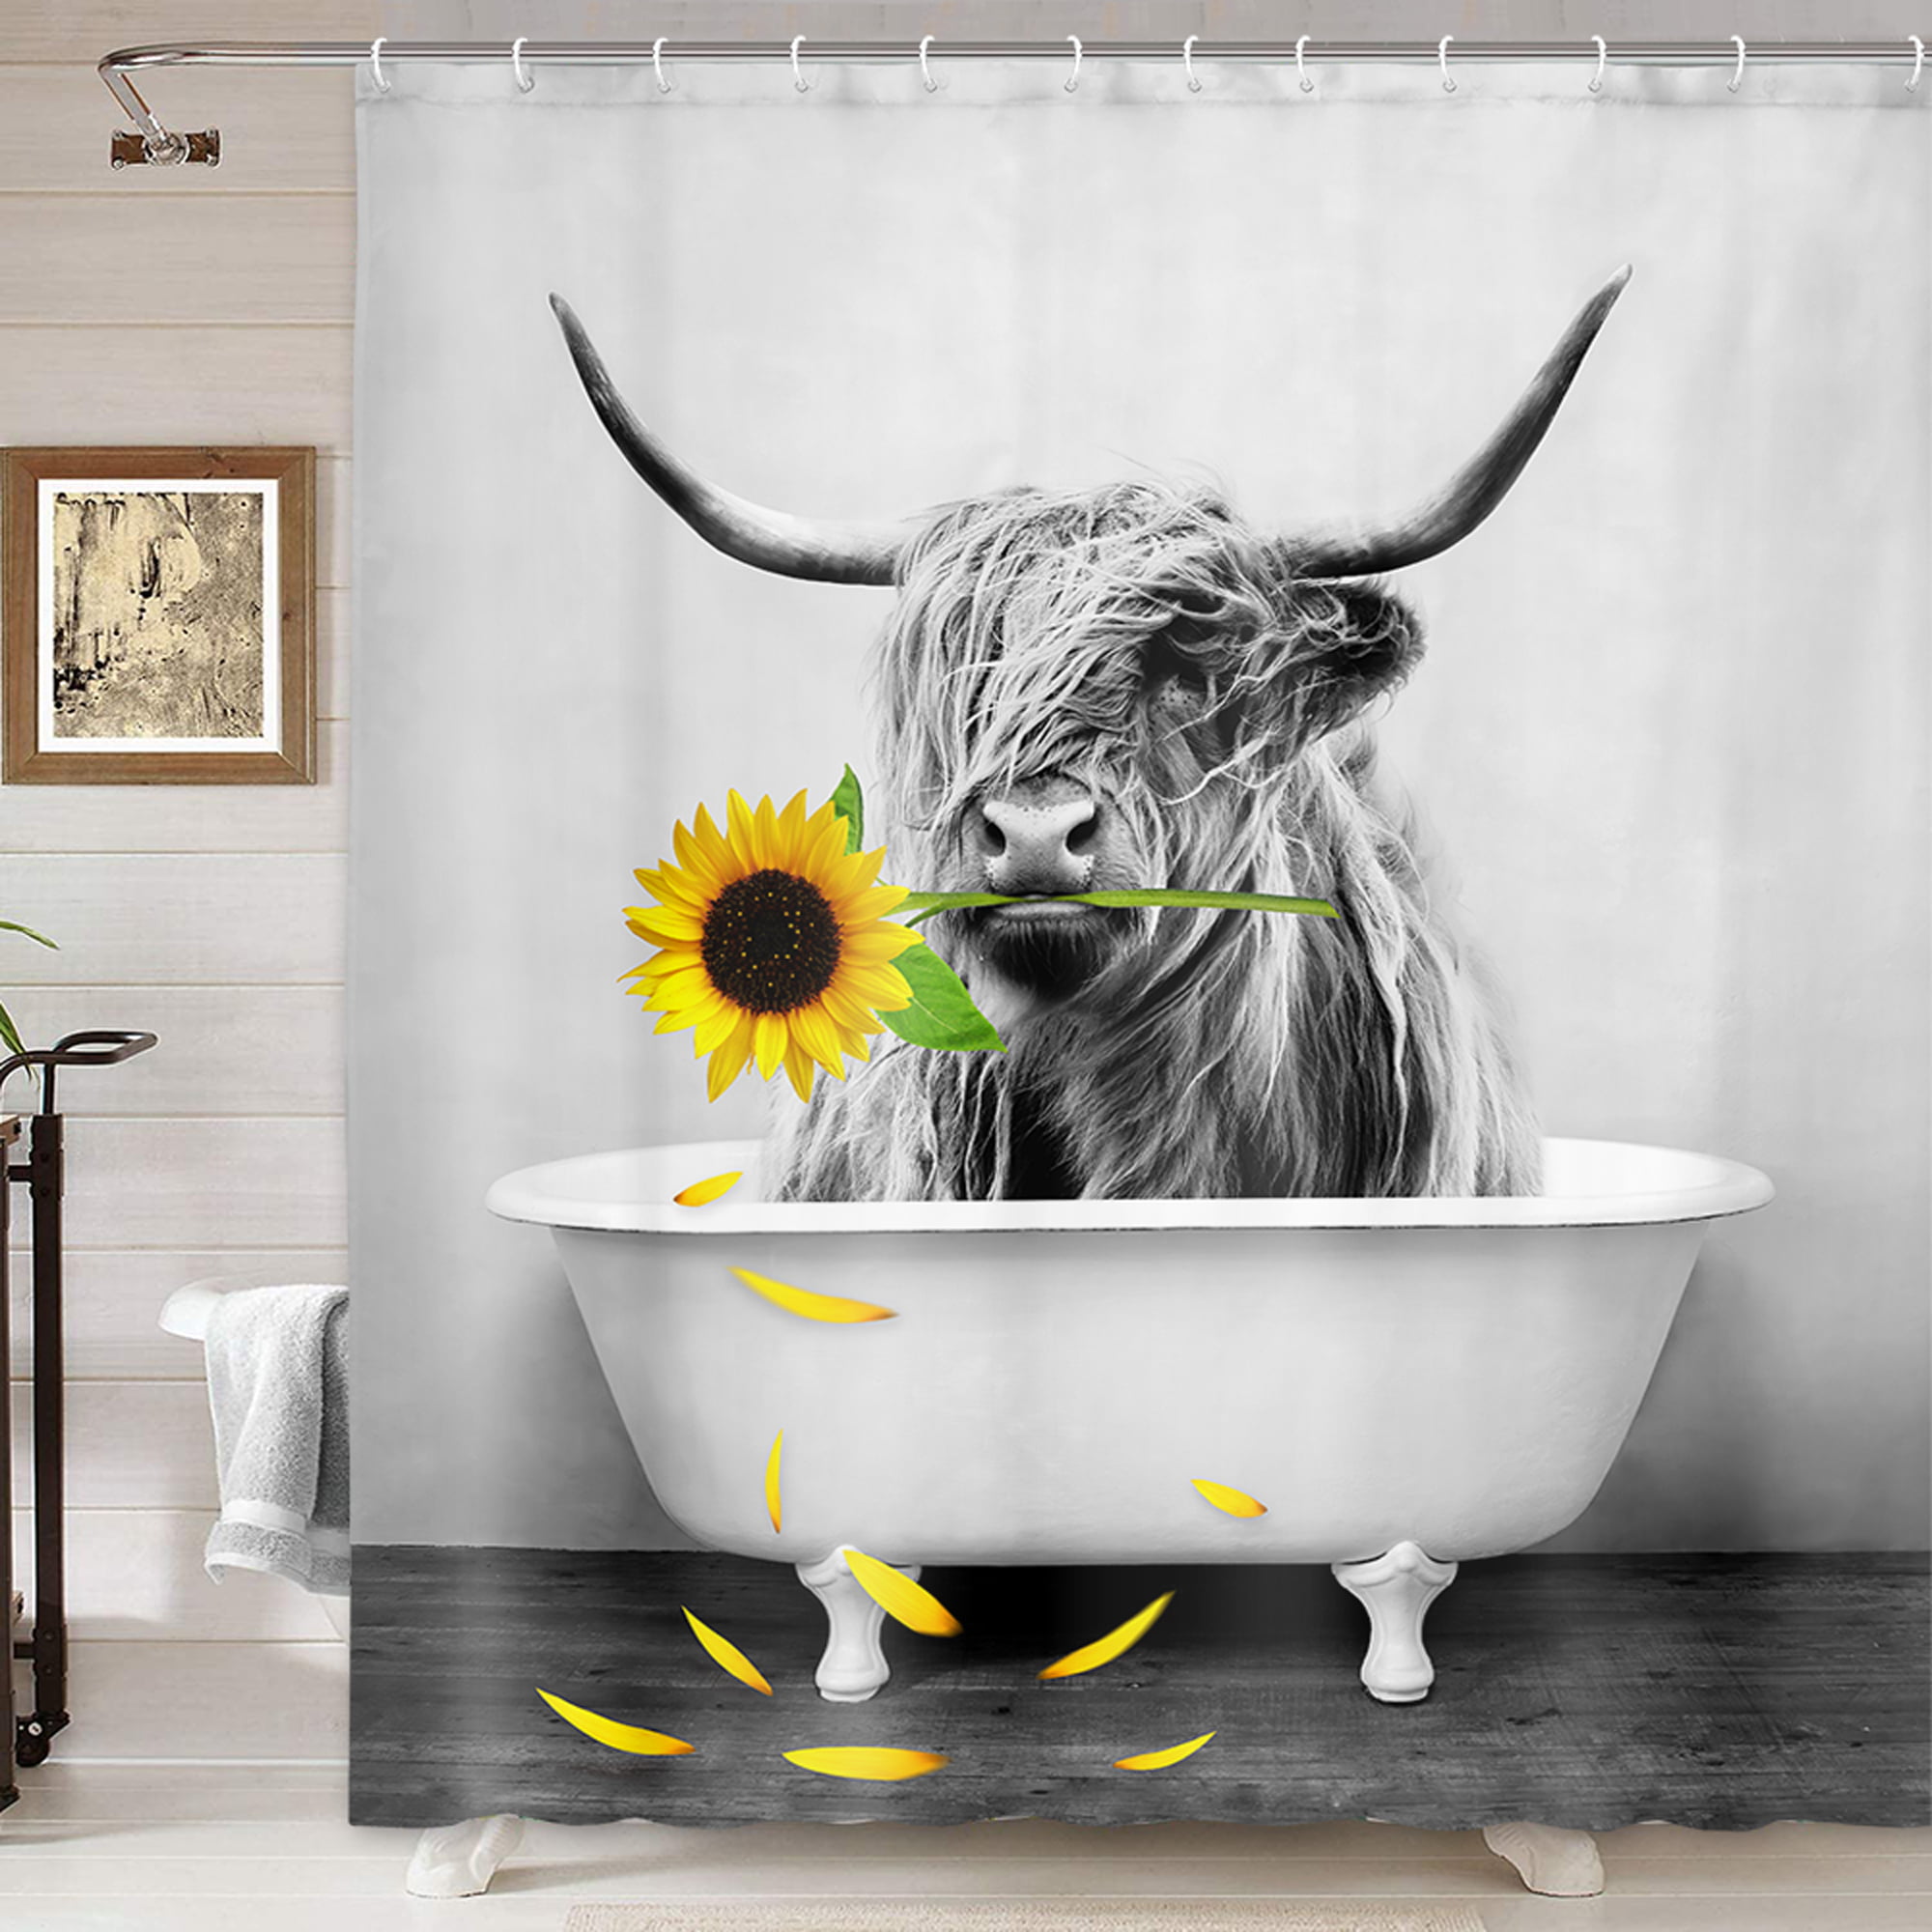 Funny Cow Heifer Painted Colorful Wood Plank Shower Curtain Set Bathroom Decor 